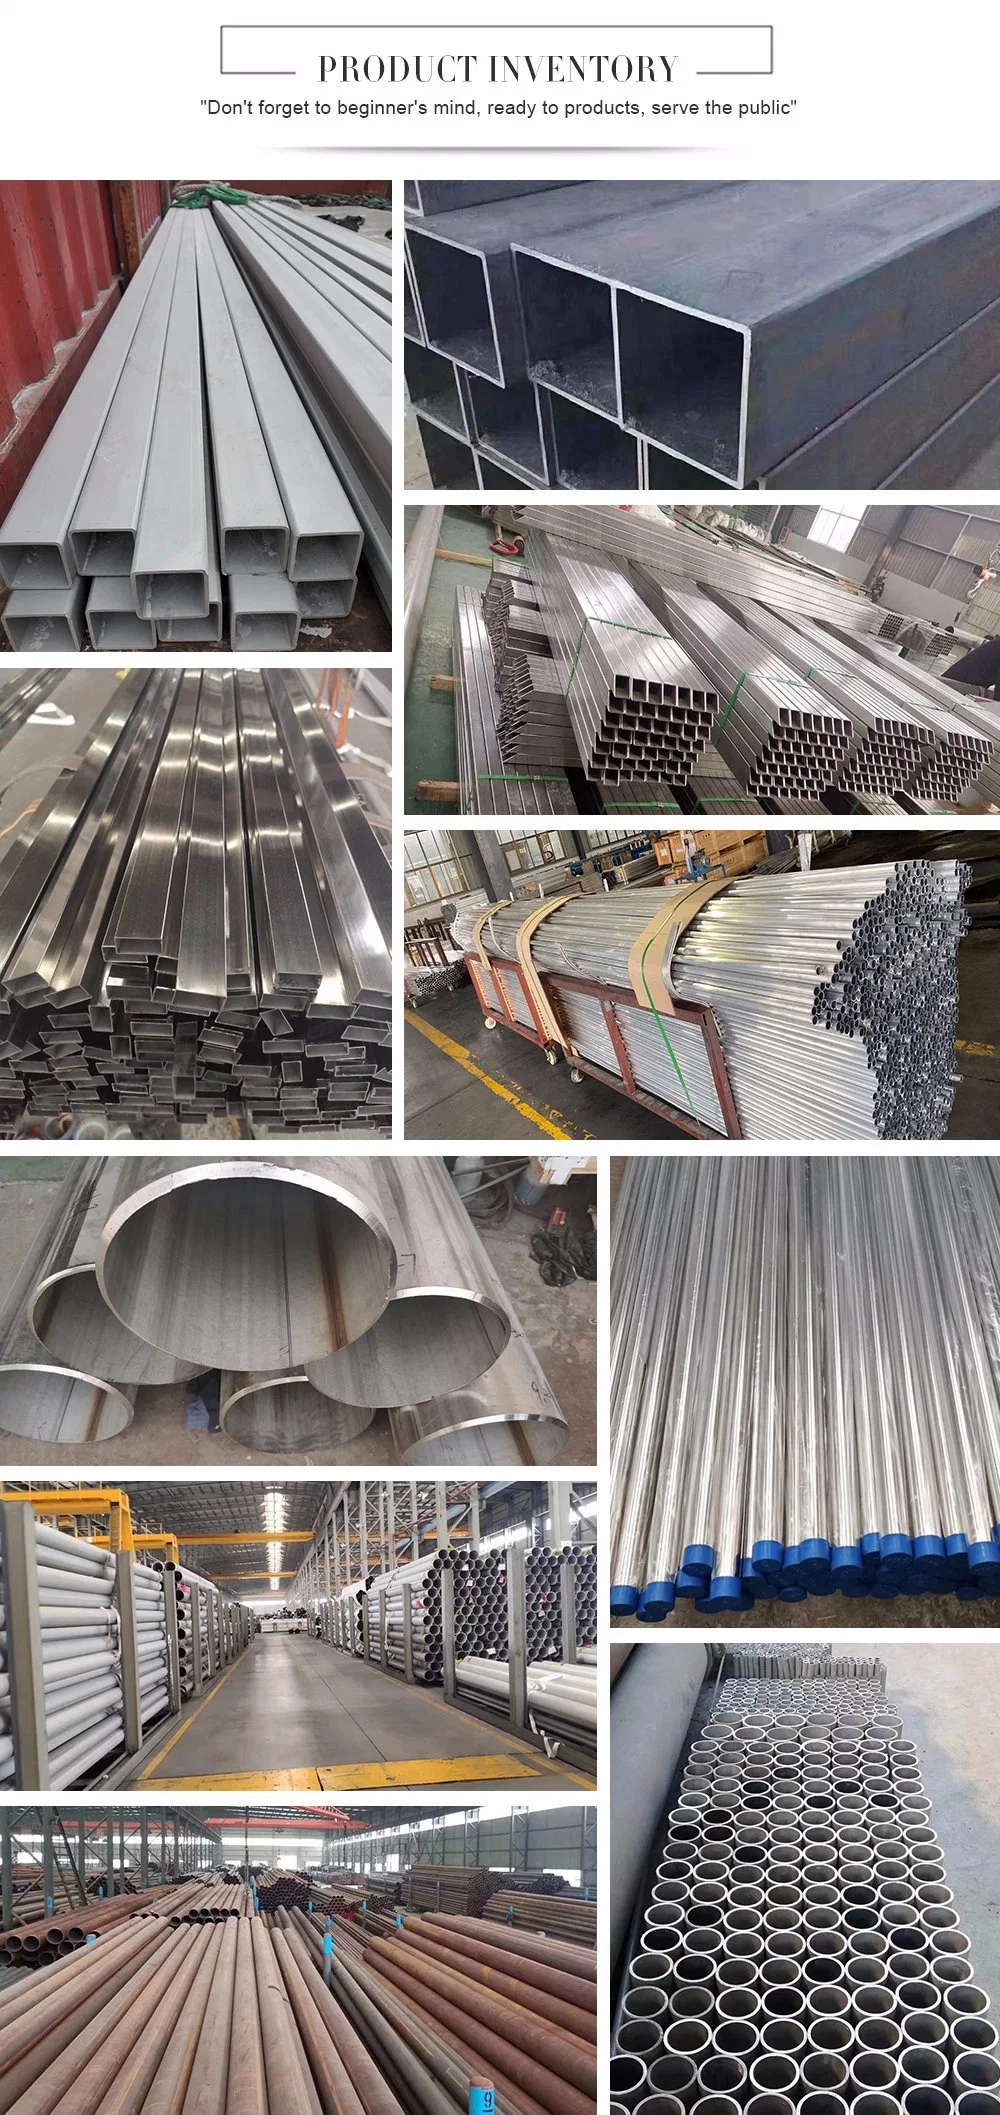 304L 316 316L 310 310S 321 304 430 904L Seamless Stainless Steel Pipes Tube